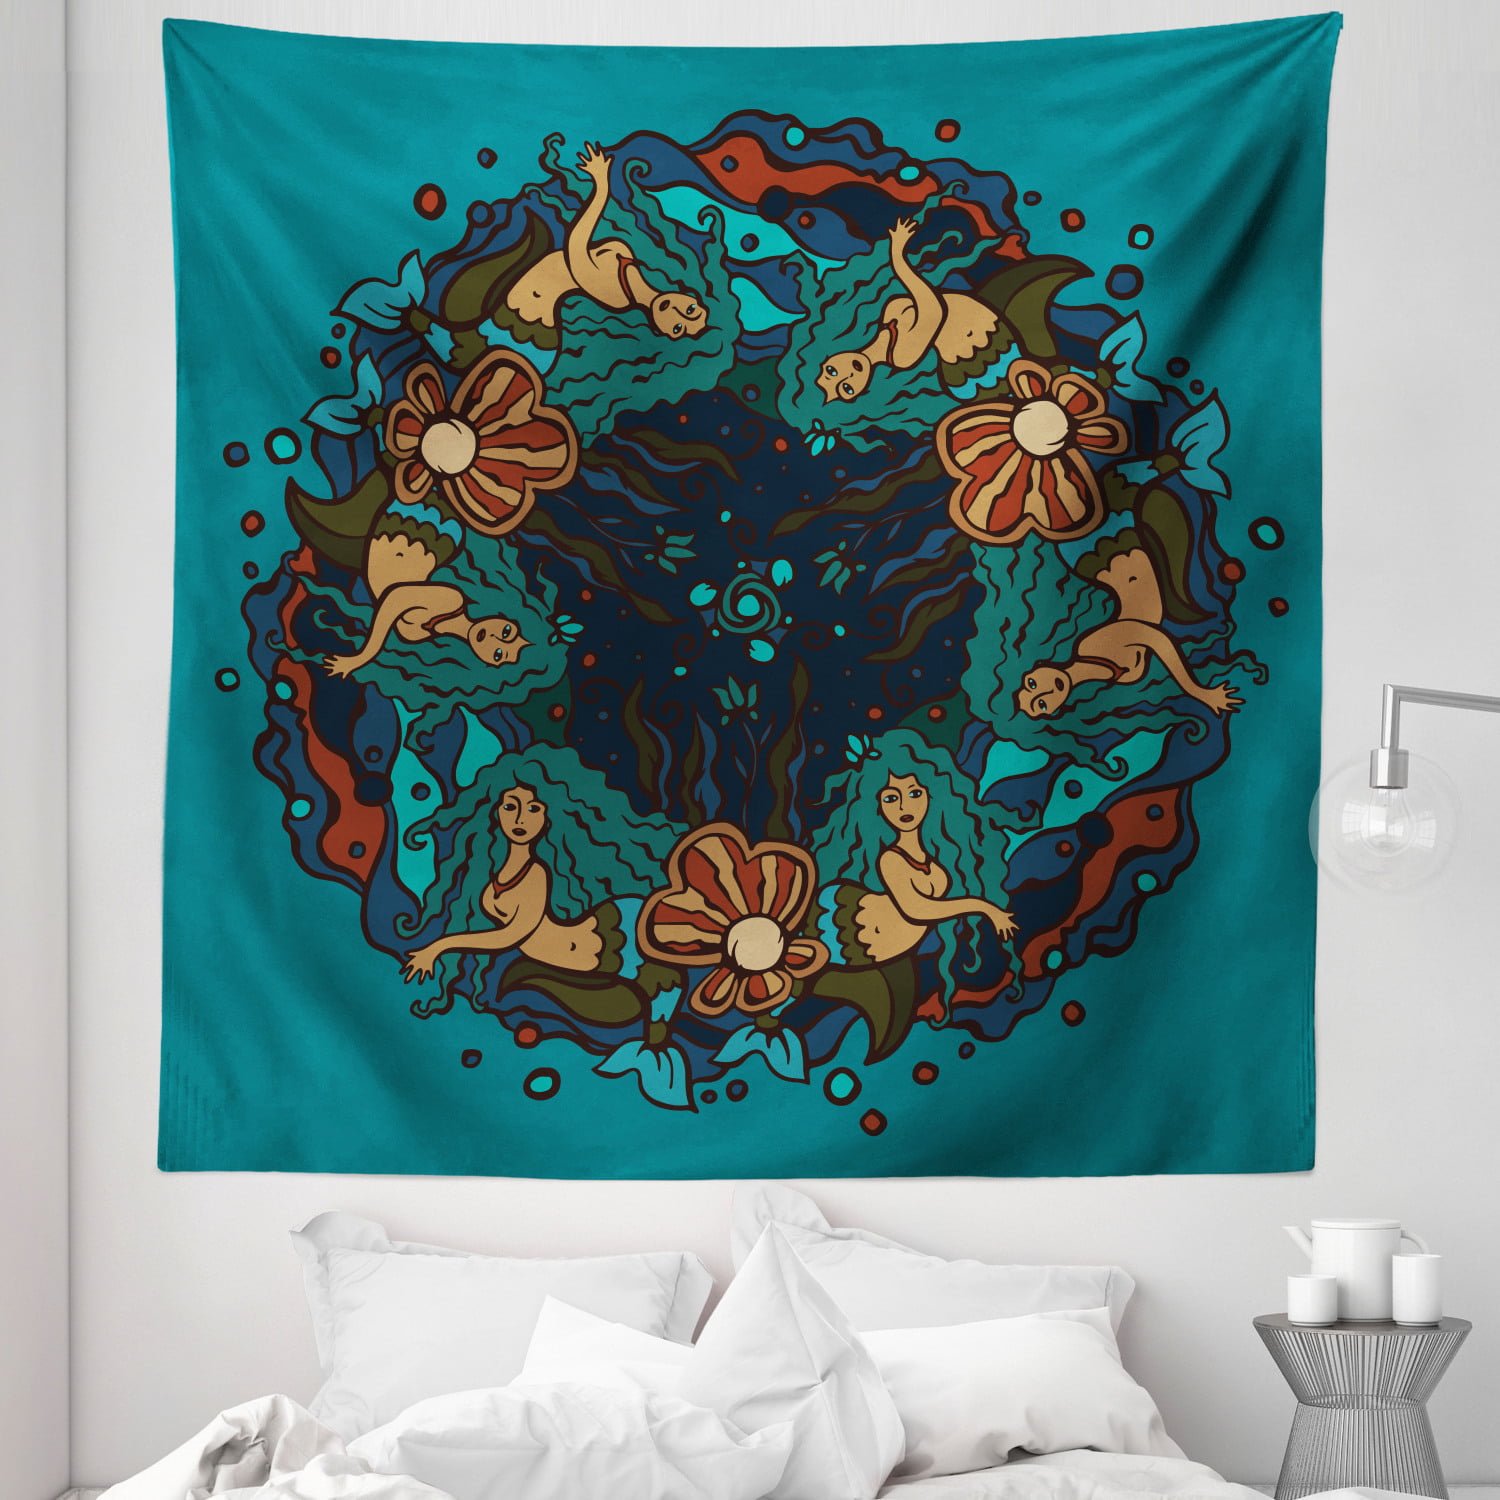 Blue Color Wall Hanging Cotton Mermaid Tapestry Poster Indian Table Cover Hippie